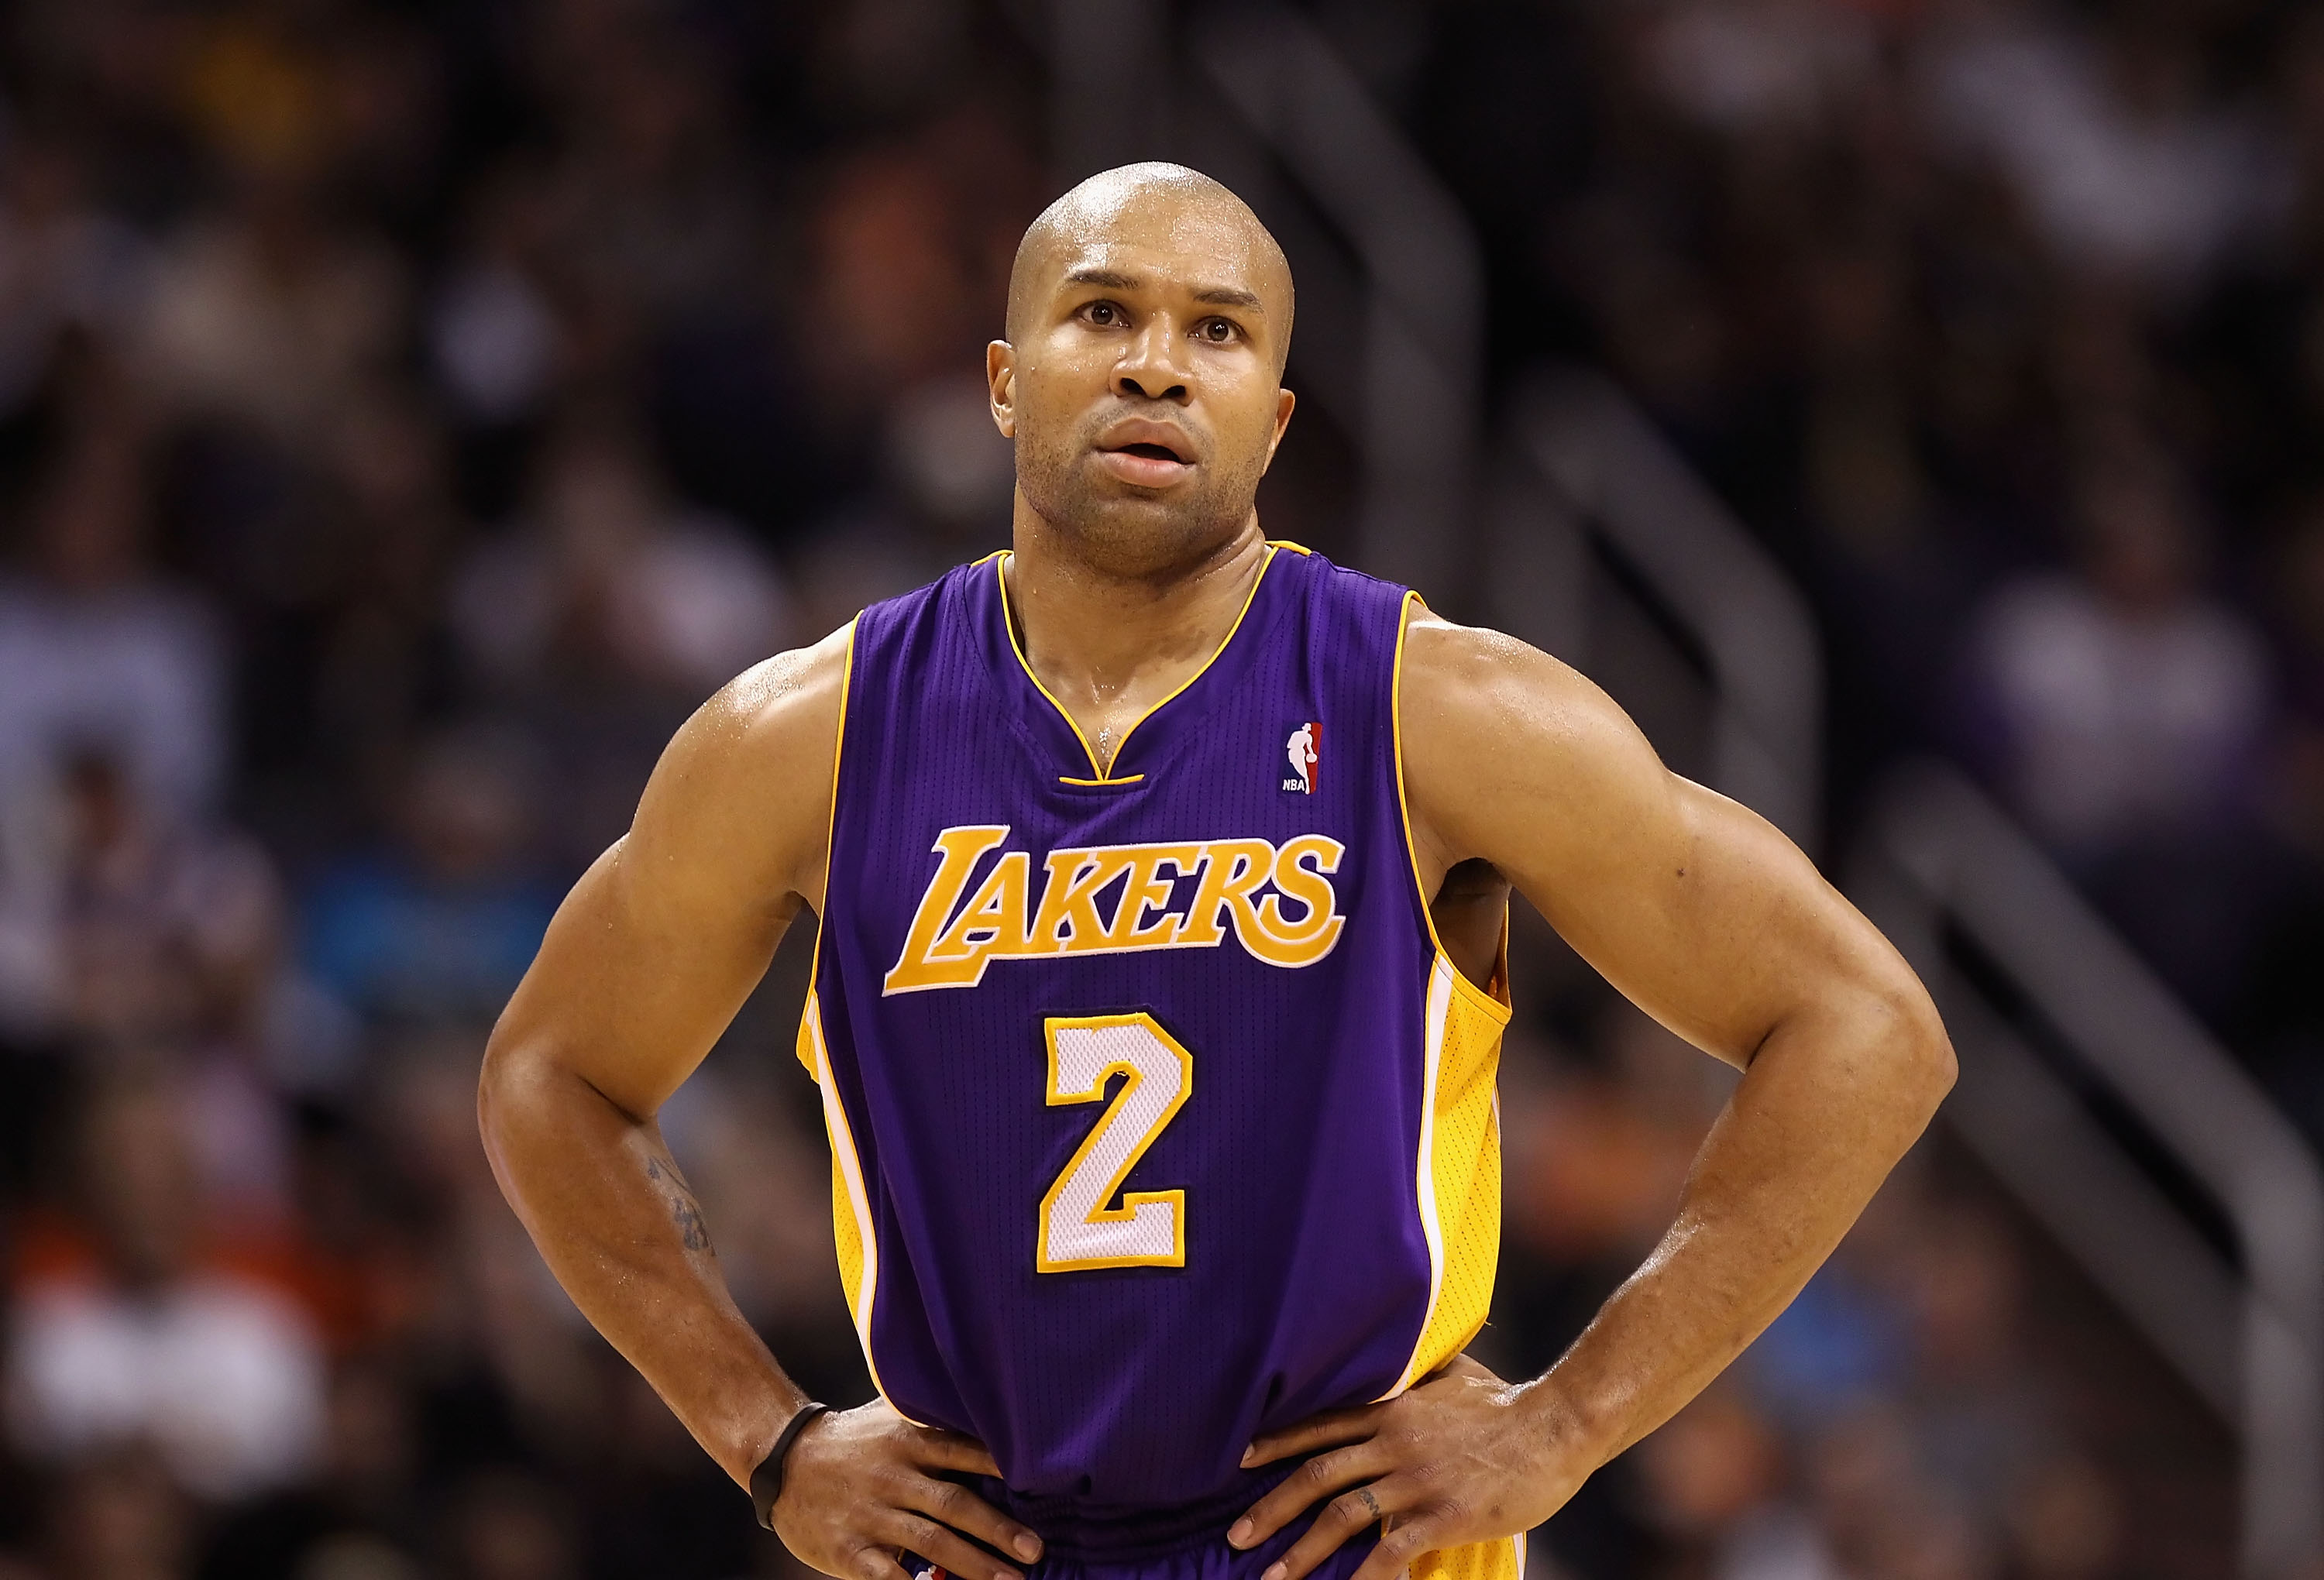 Lakers Retired Numbers (Picture Click) Quiz - By Peacemaker